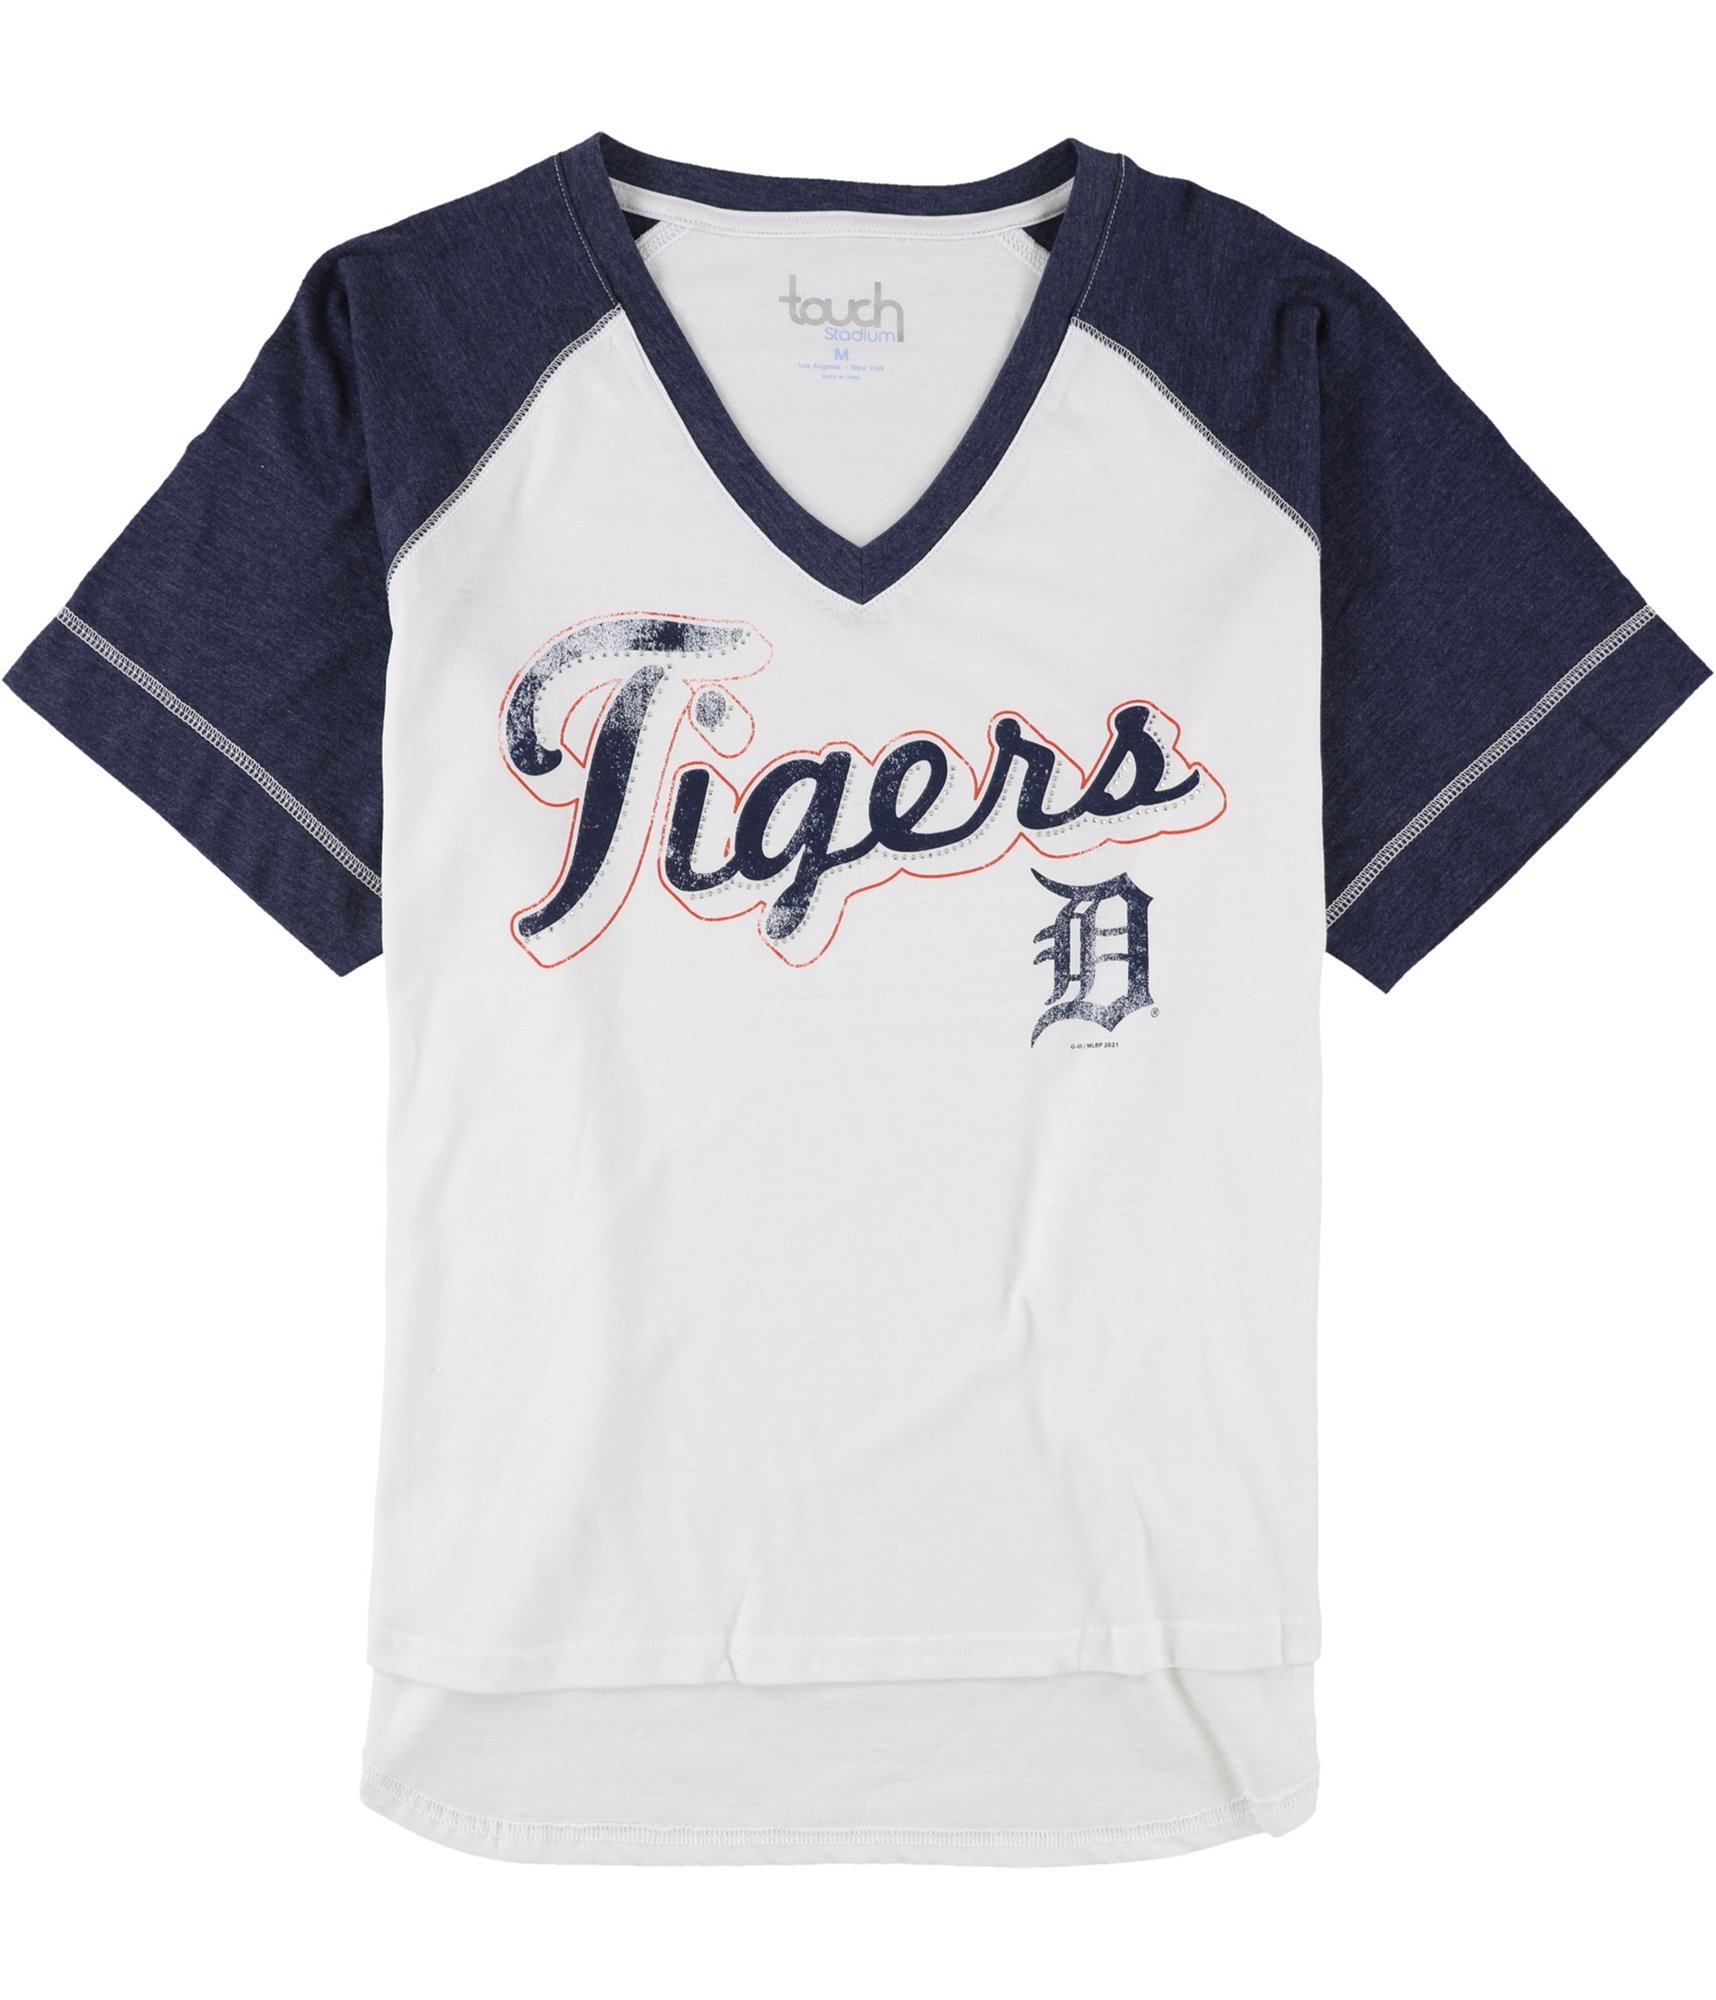 Touch Womens Detroit Tigers Embellished T-Shirt, White, Medium